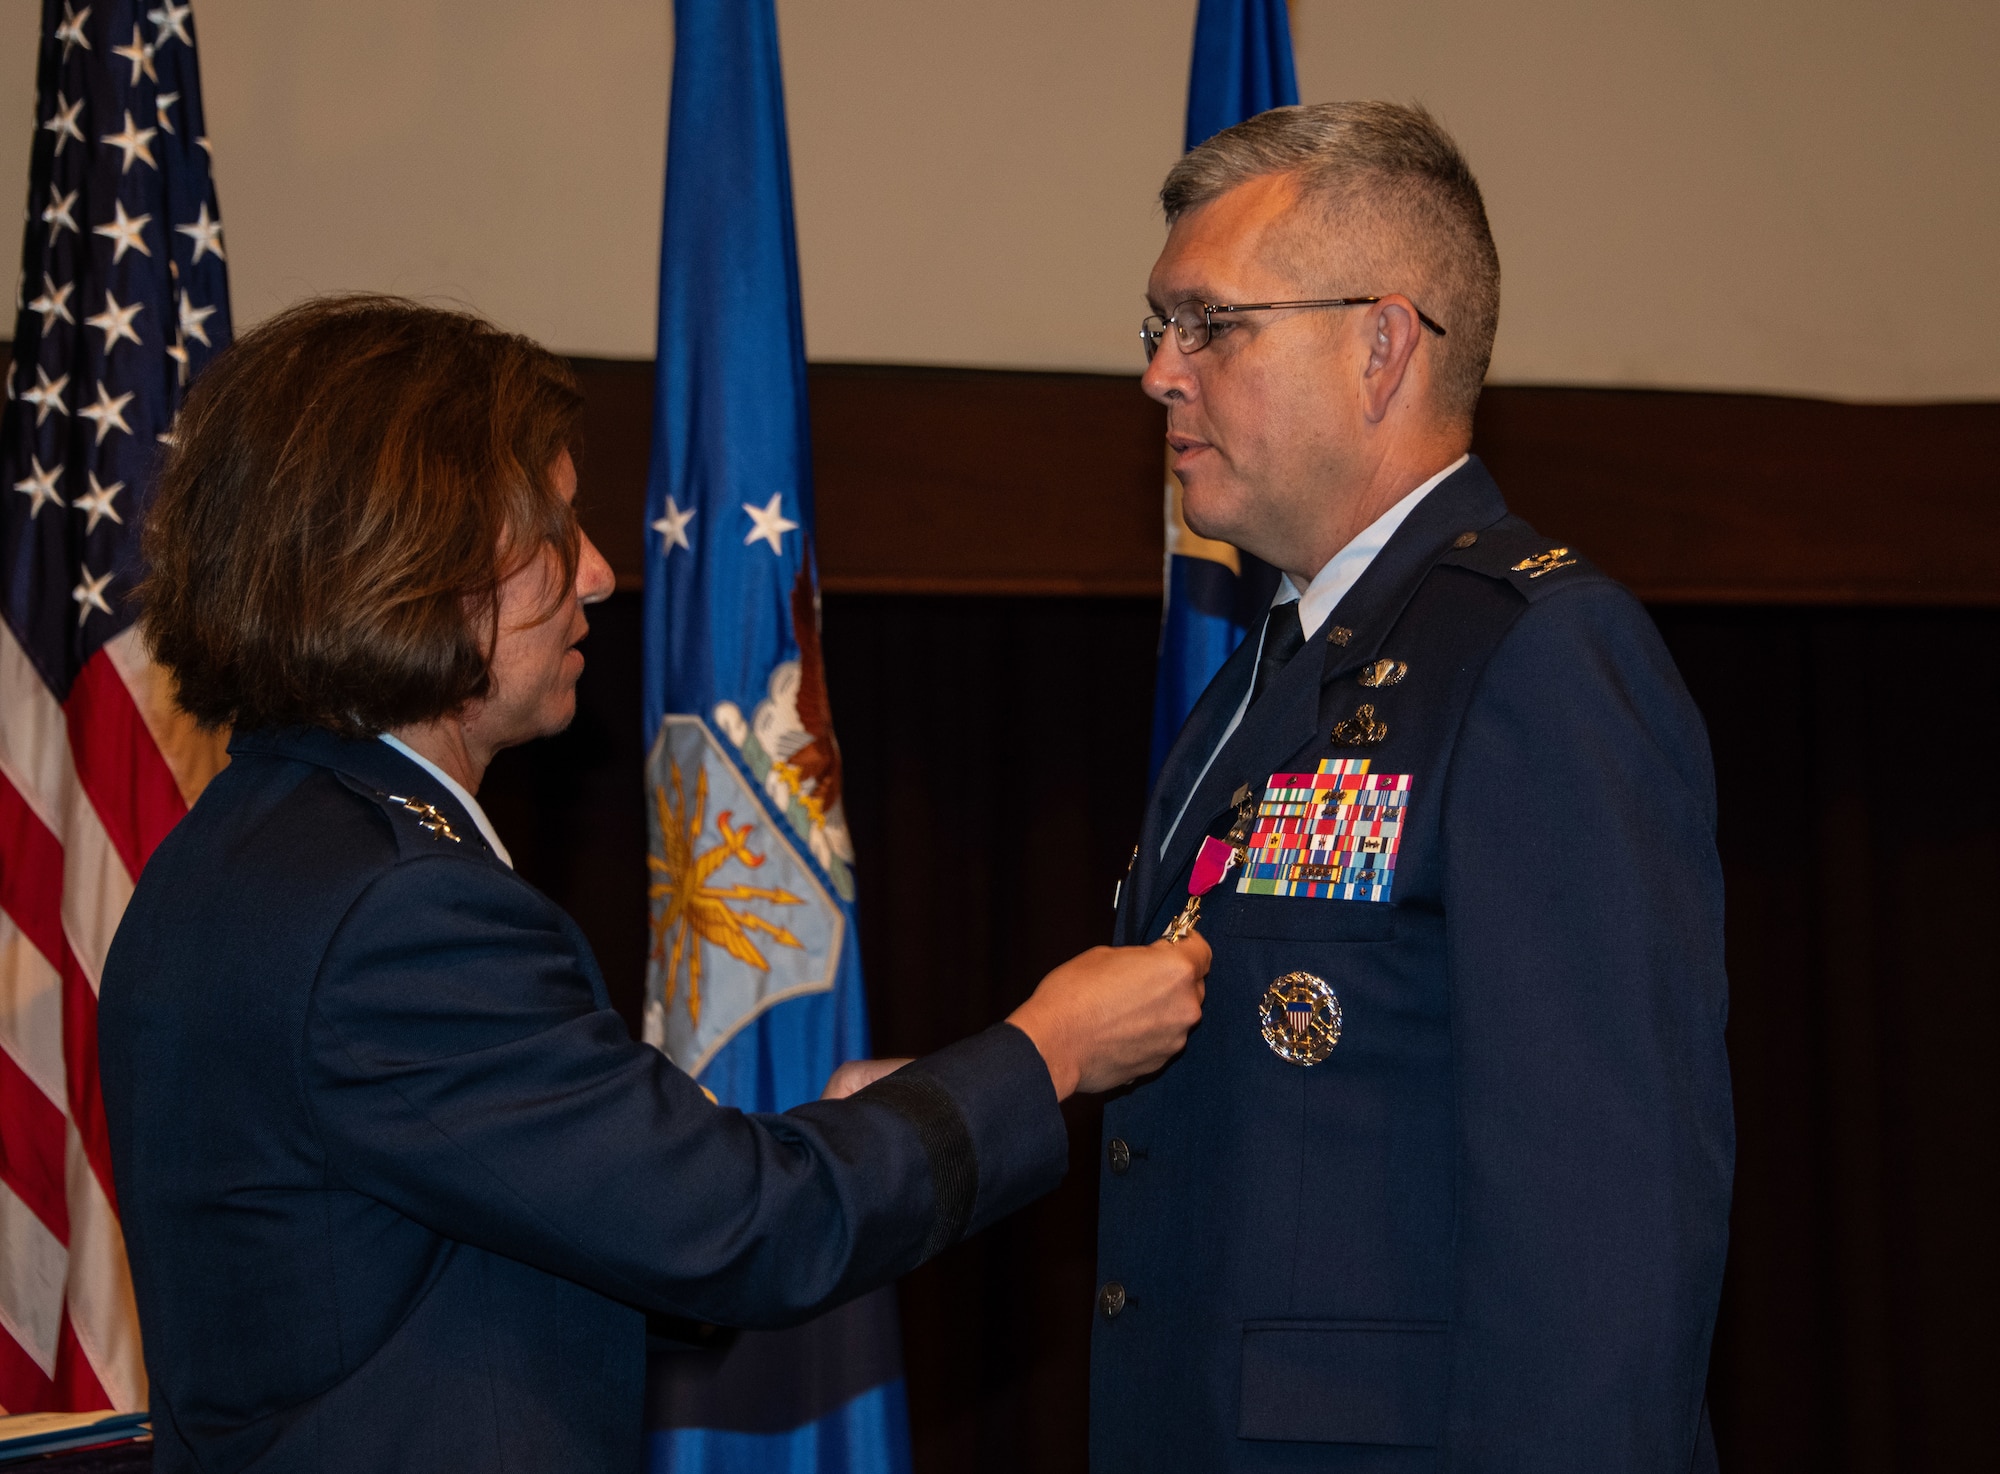 Col. Anthony D. Babcock receives the Legion of Merit medal, second oak leaf cluster, from Lt. Gen. Andrea D. Tullos, Air University commander and president, during the Thomas N. Barnes Center for Enlisted Education change of command ceremony at the Senior Noncommissioned Officer Academy on Maxwell Air Force Base - Gunter Annex, June 28, 2023. During the ceremony, Babcock relinquished command of the Barnes Center to Col. Damian Schlussel. (U.S. Air Force photo/Brian Ferguson)